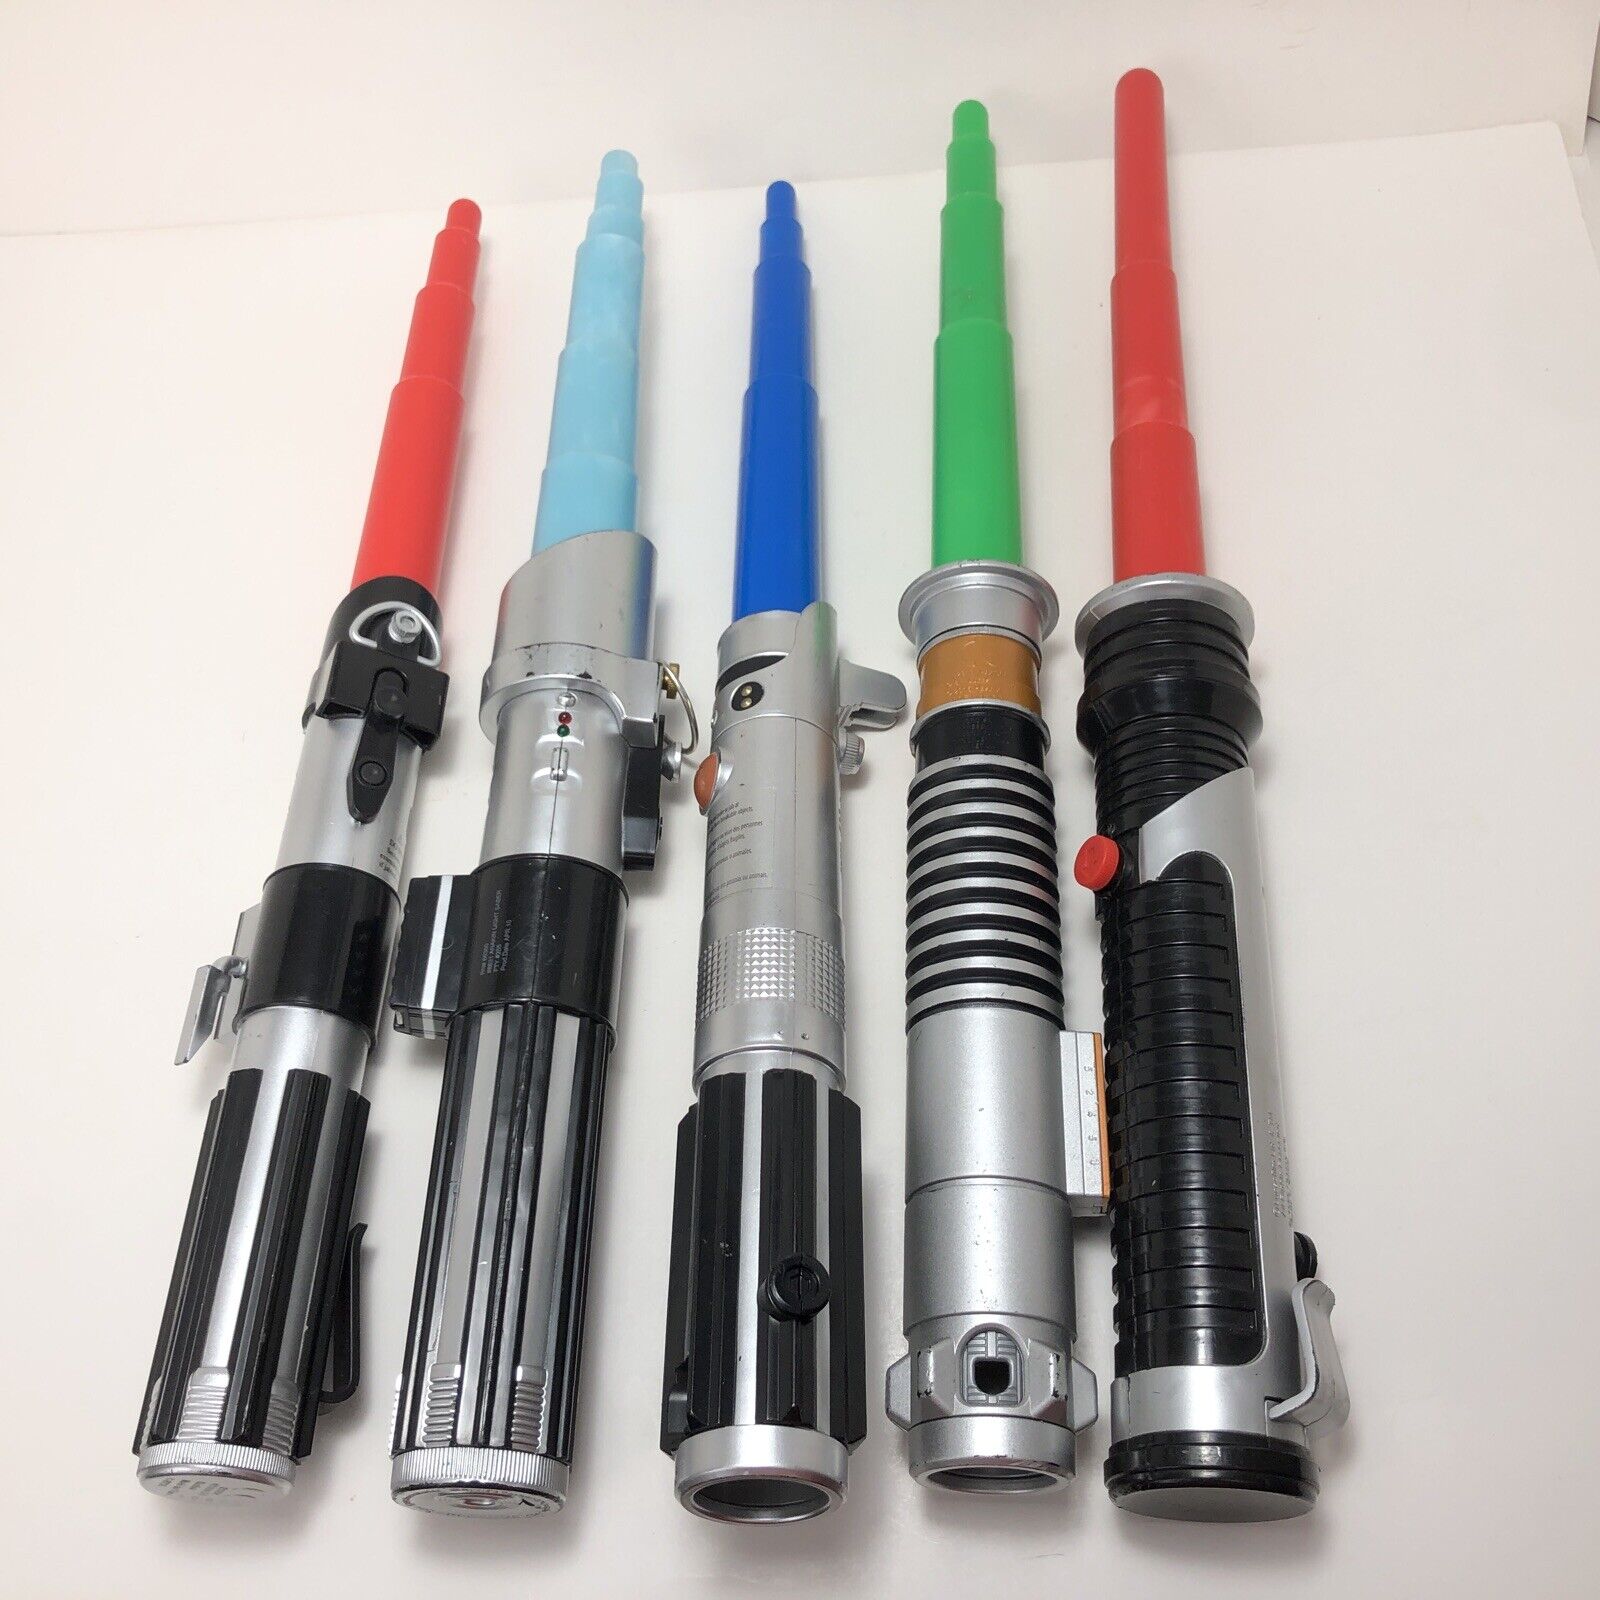 Star Wars Hasbro Lightsabers Party Toy Lot of 5 Mixed Red Blue Green Sabers